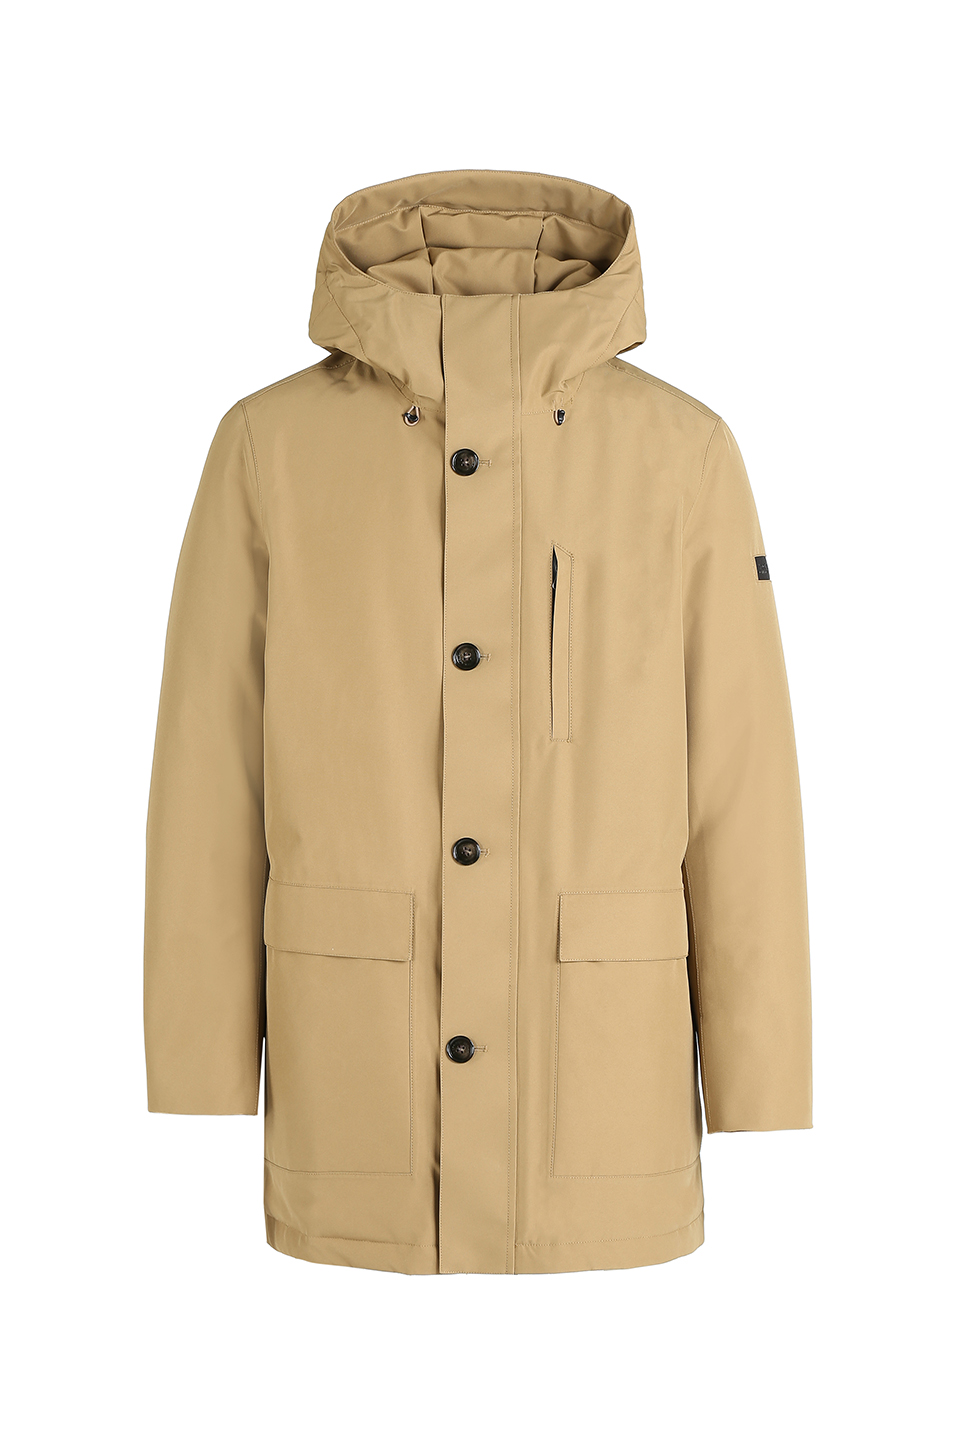 These Woolrich Gore-Tex Jackets Are Winter Weather Essentials